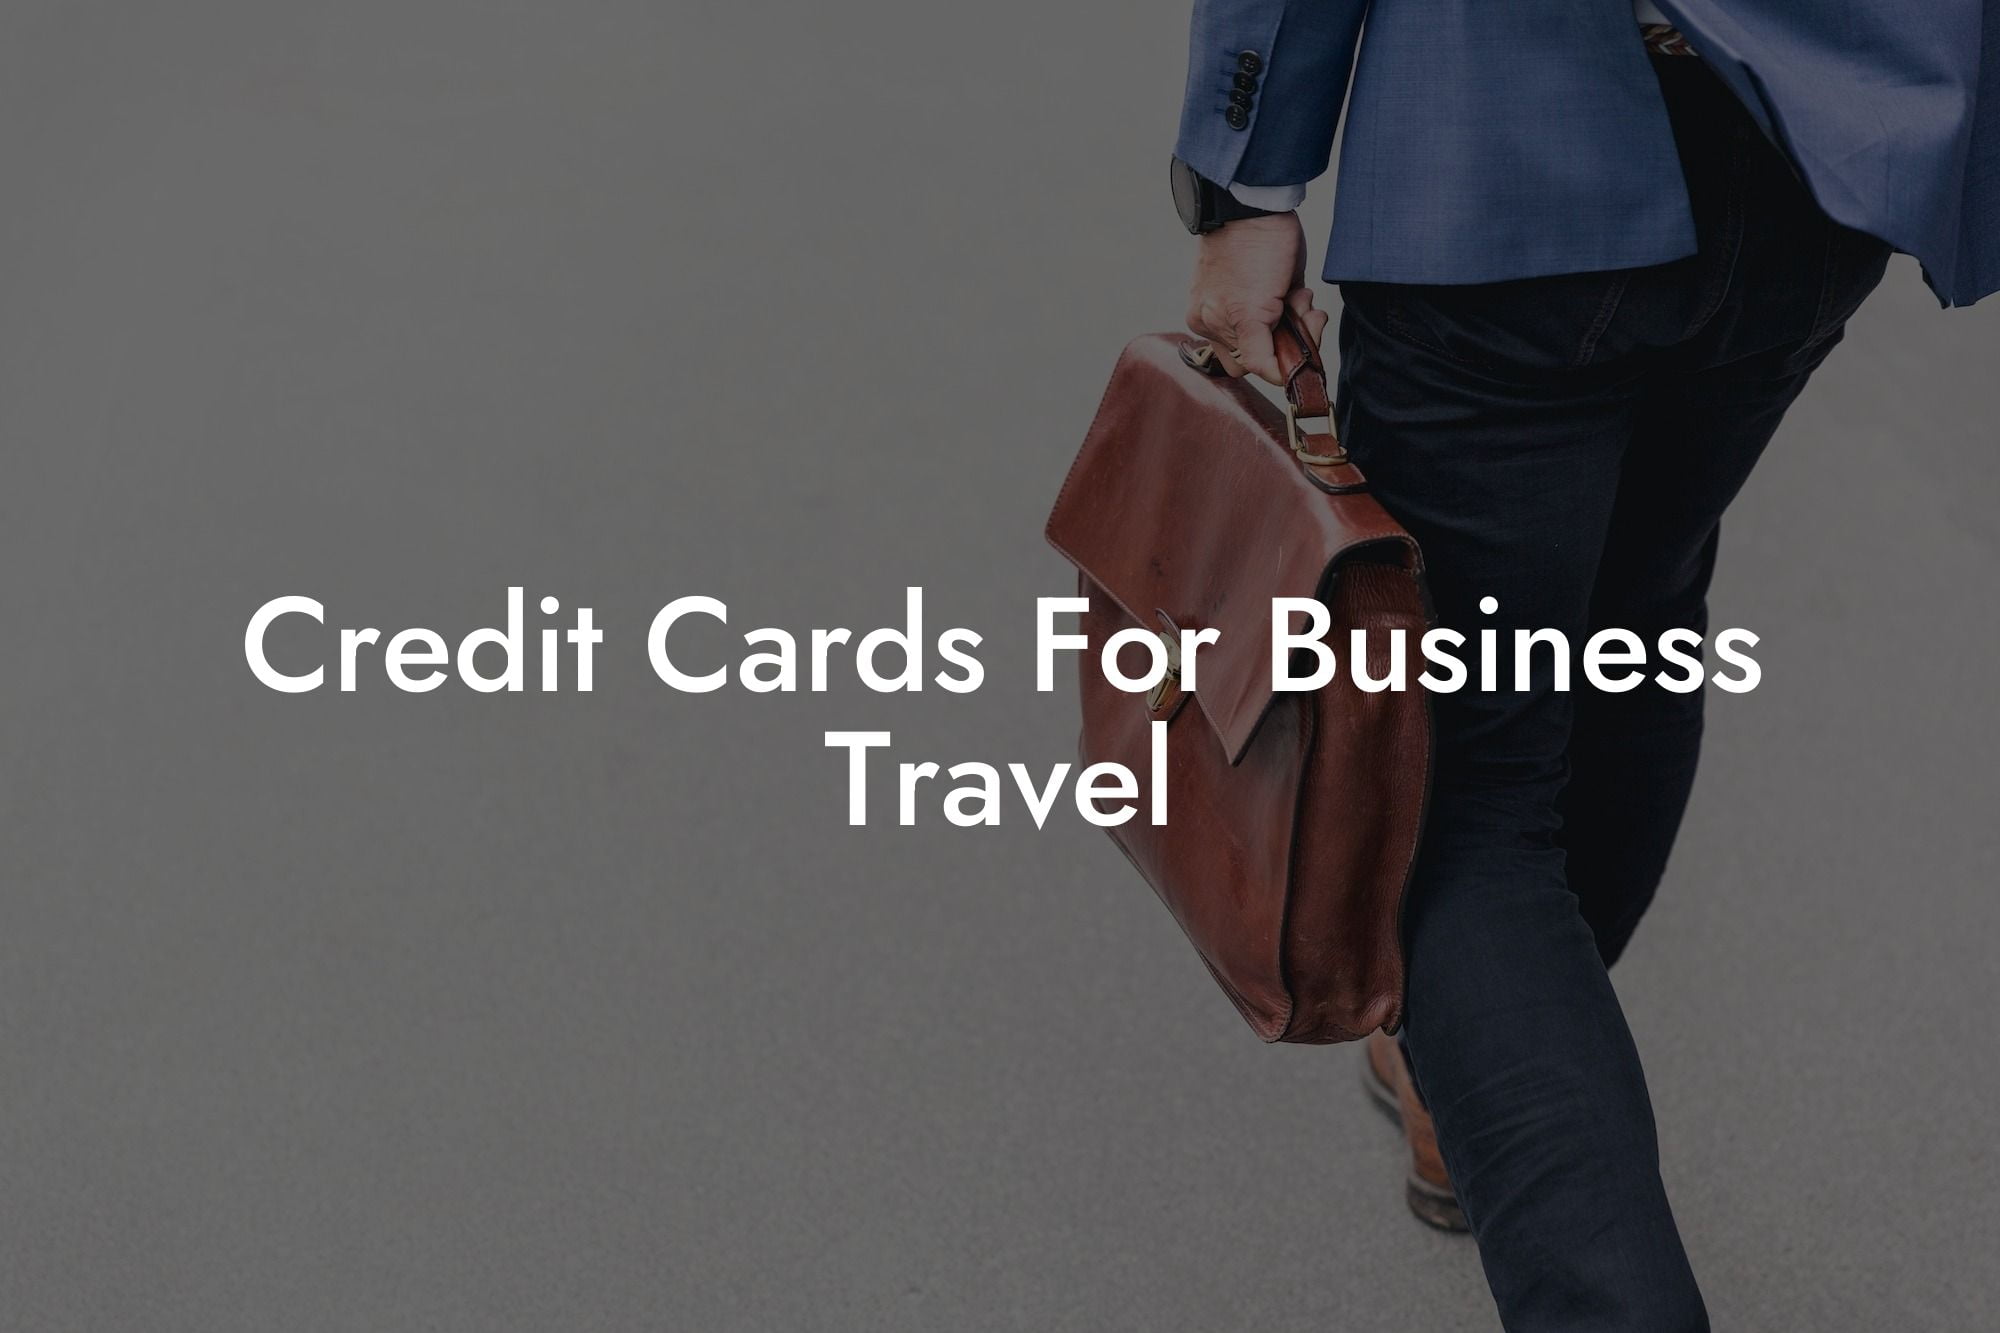 Credit Cards For Business Travel